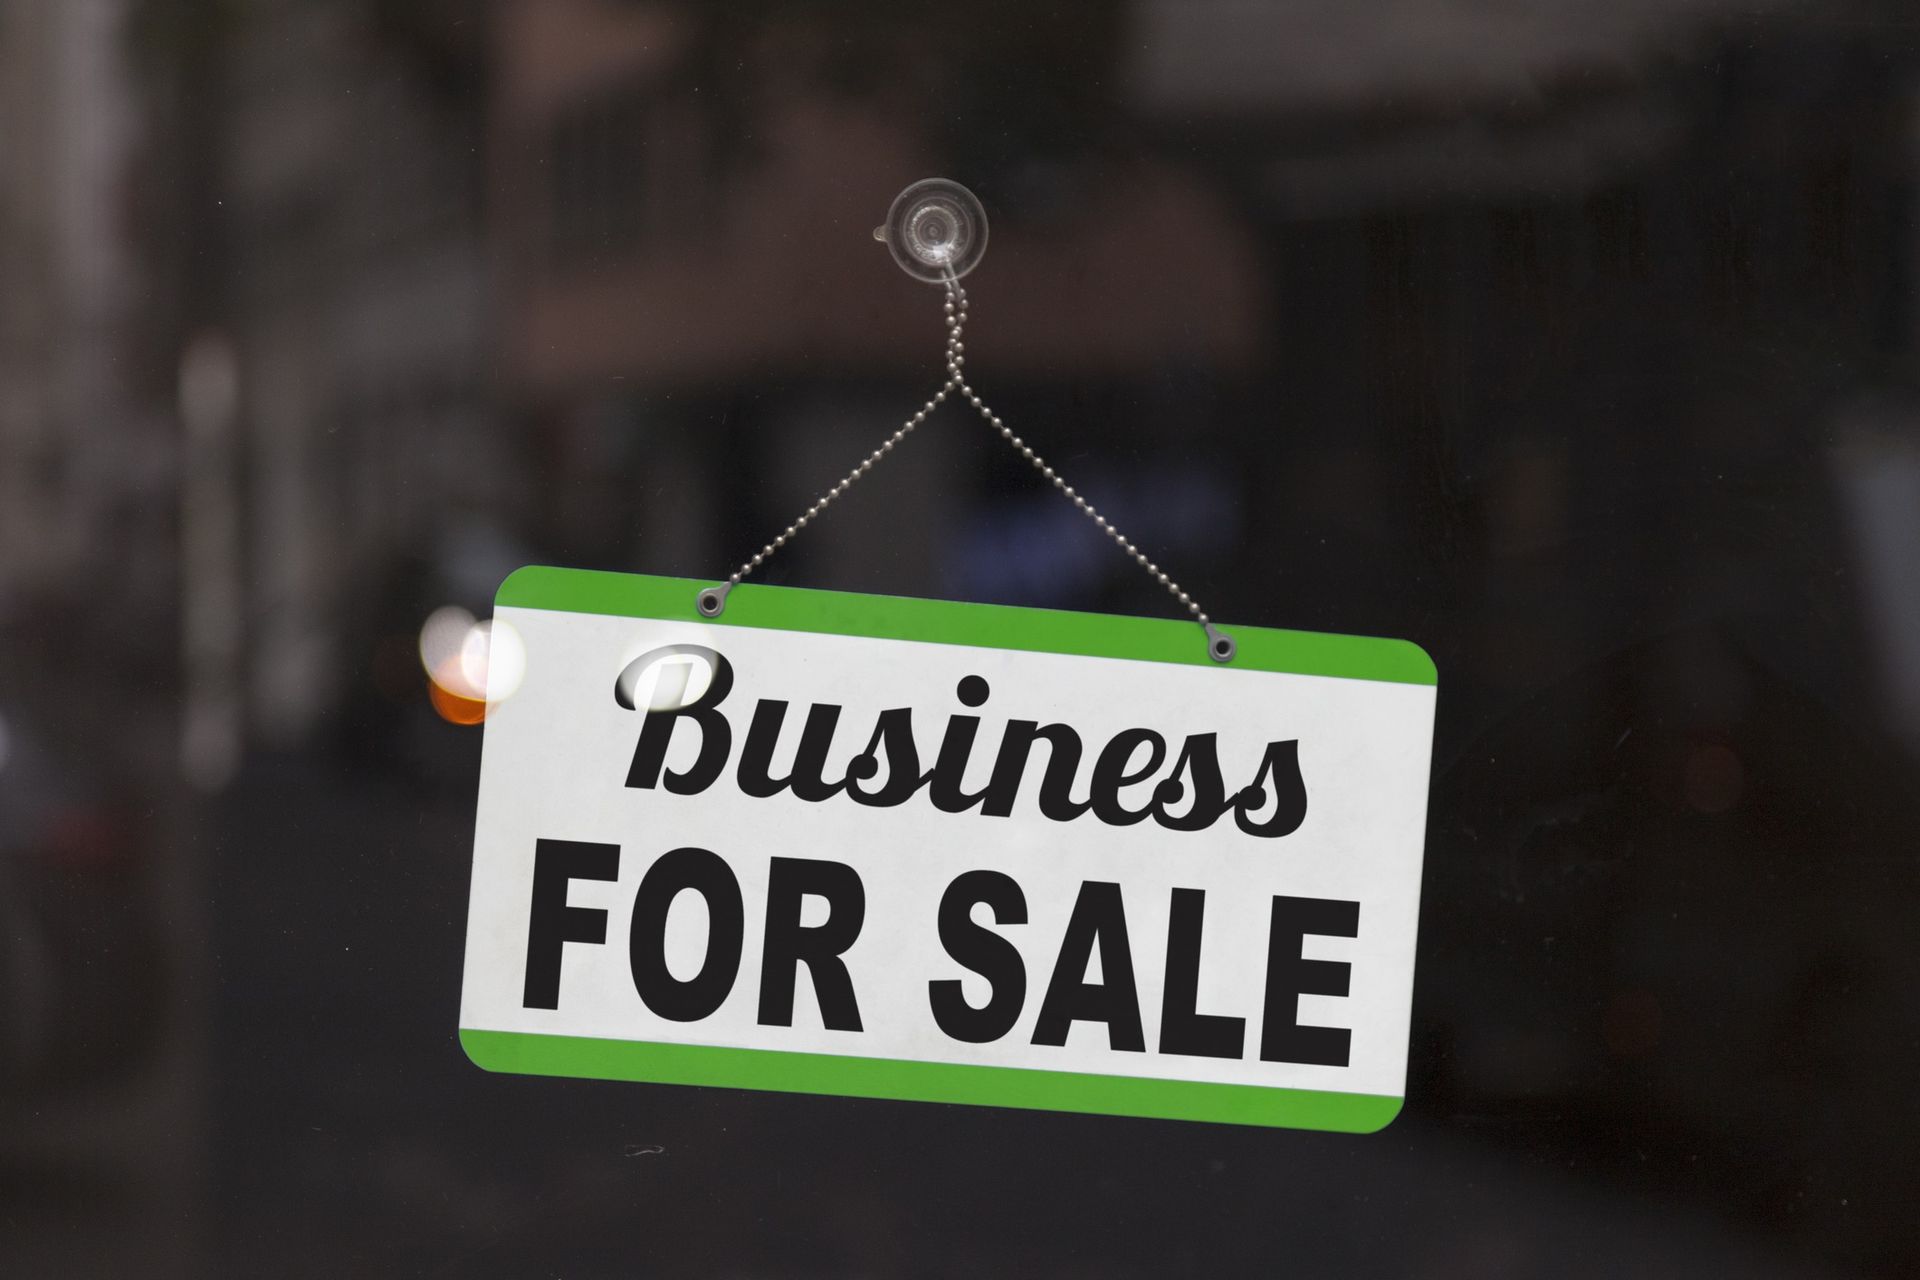 A business for sale sign hangs from a window